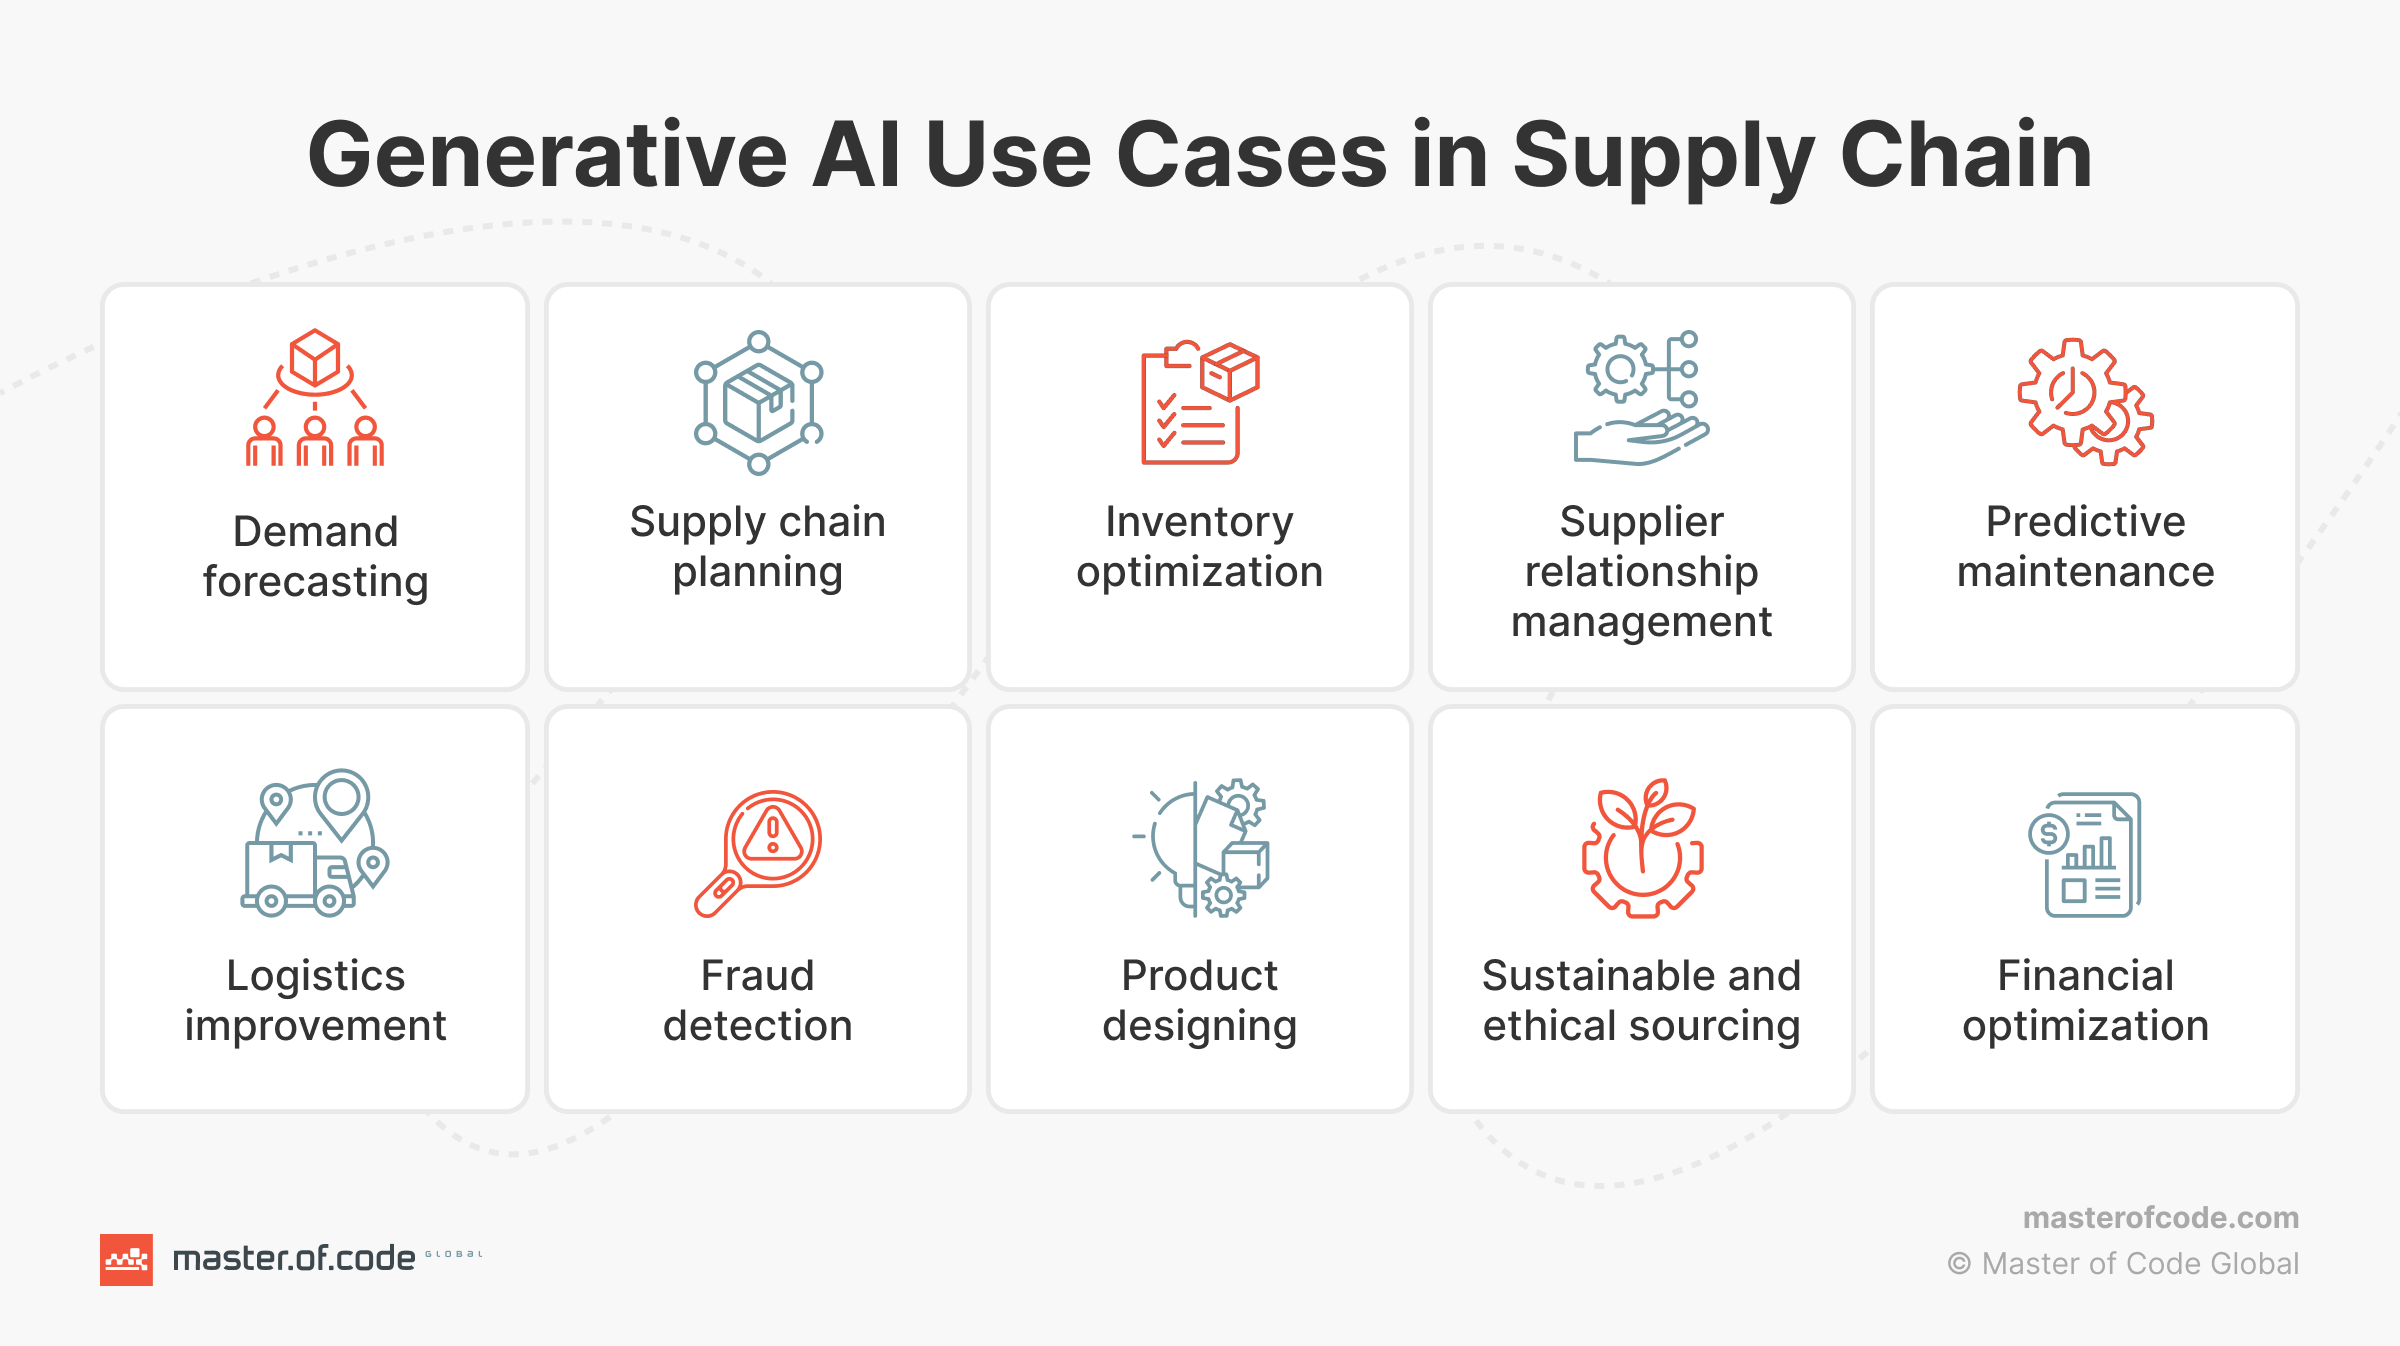 Gen AI Use Cases in Supply Chain